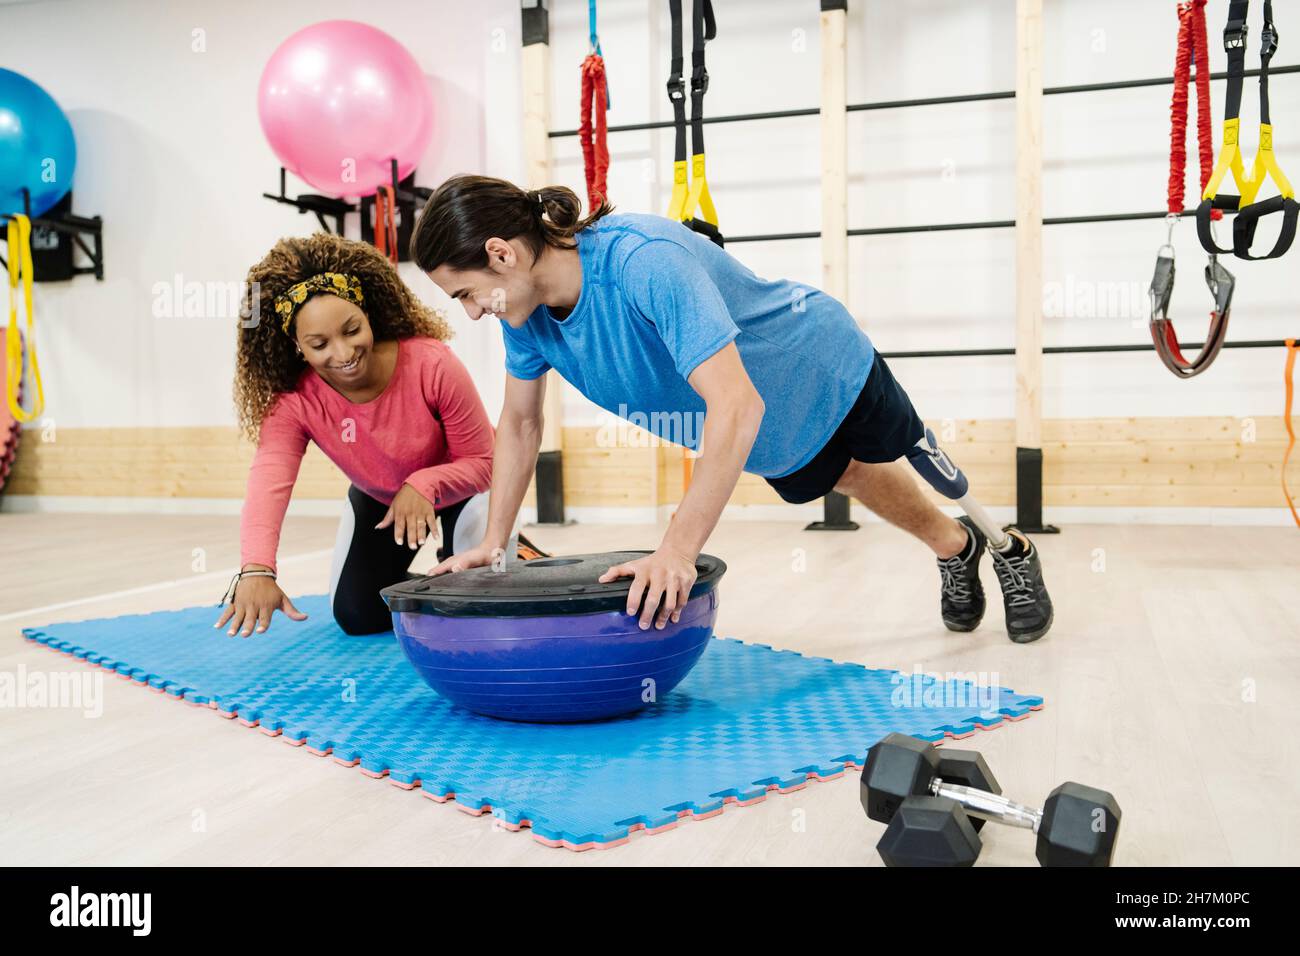 Disabled man with friend exercising on balance ball in gym Stock Photo